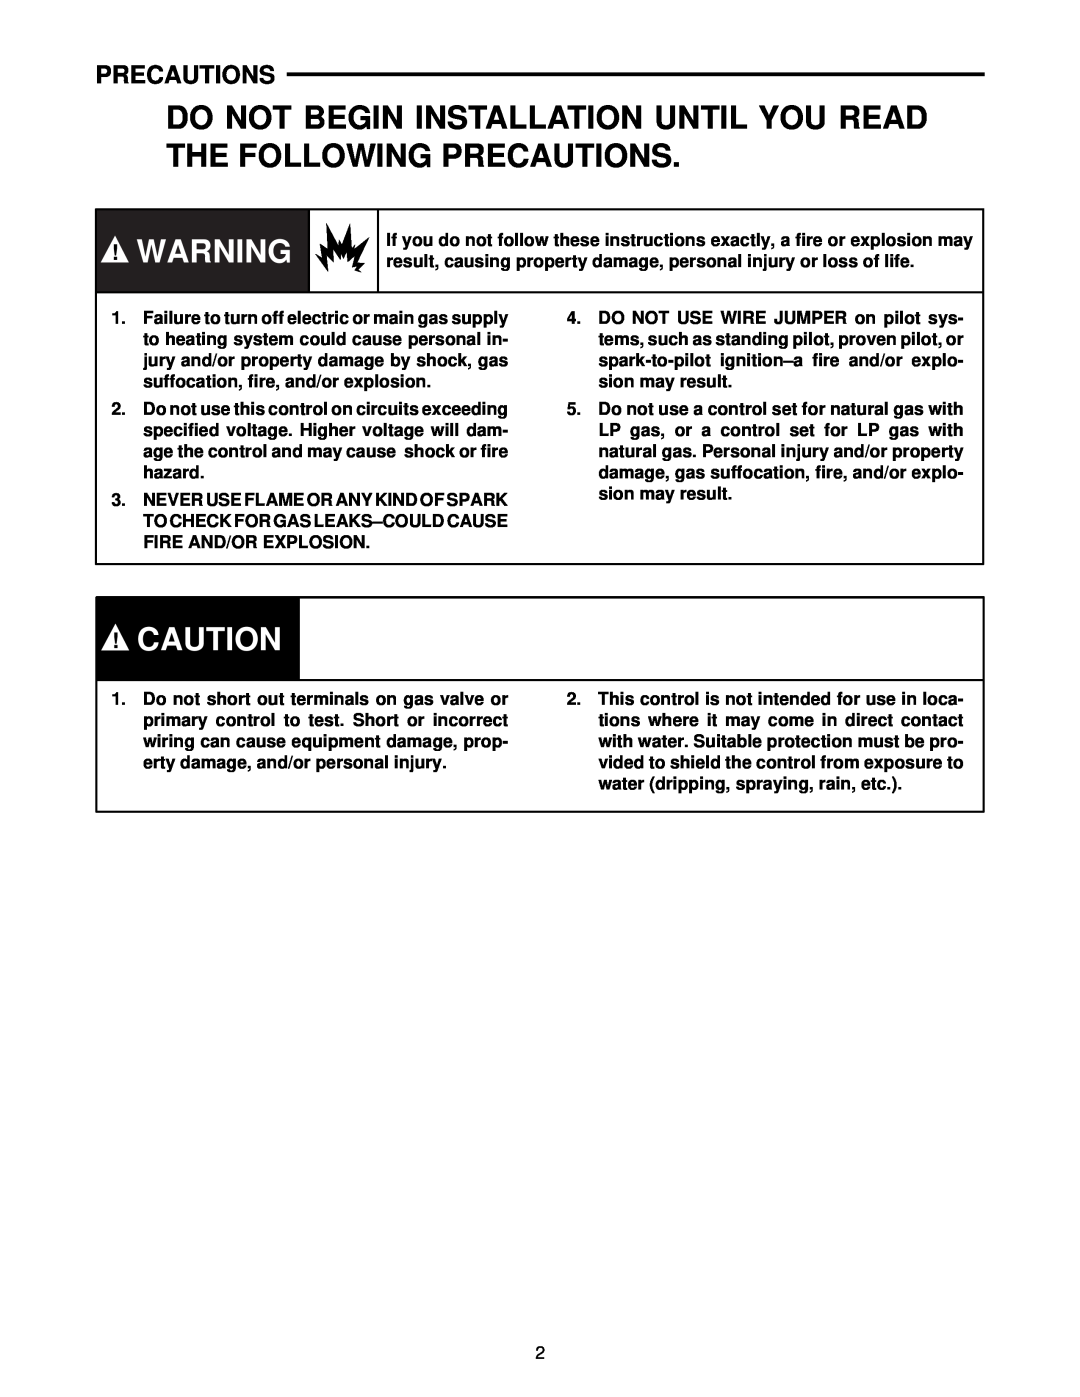 White Rodgers 36C01 installation instructions Do Not Begin Installation Until You Read The Following Precautions 